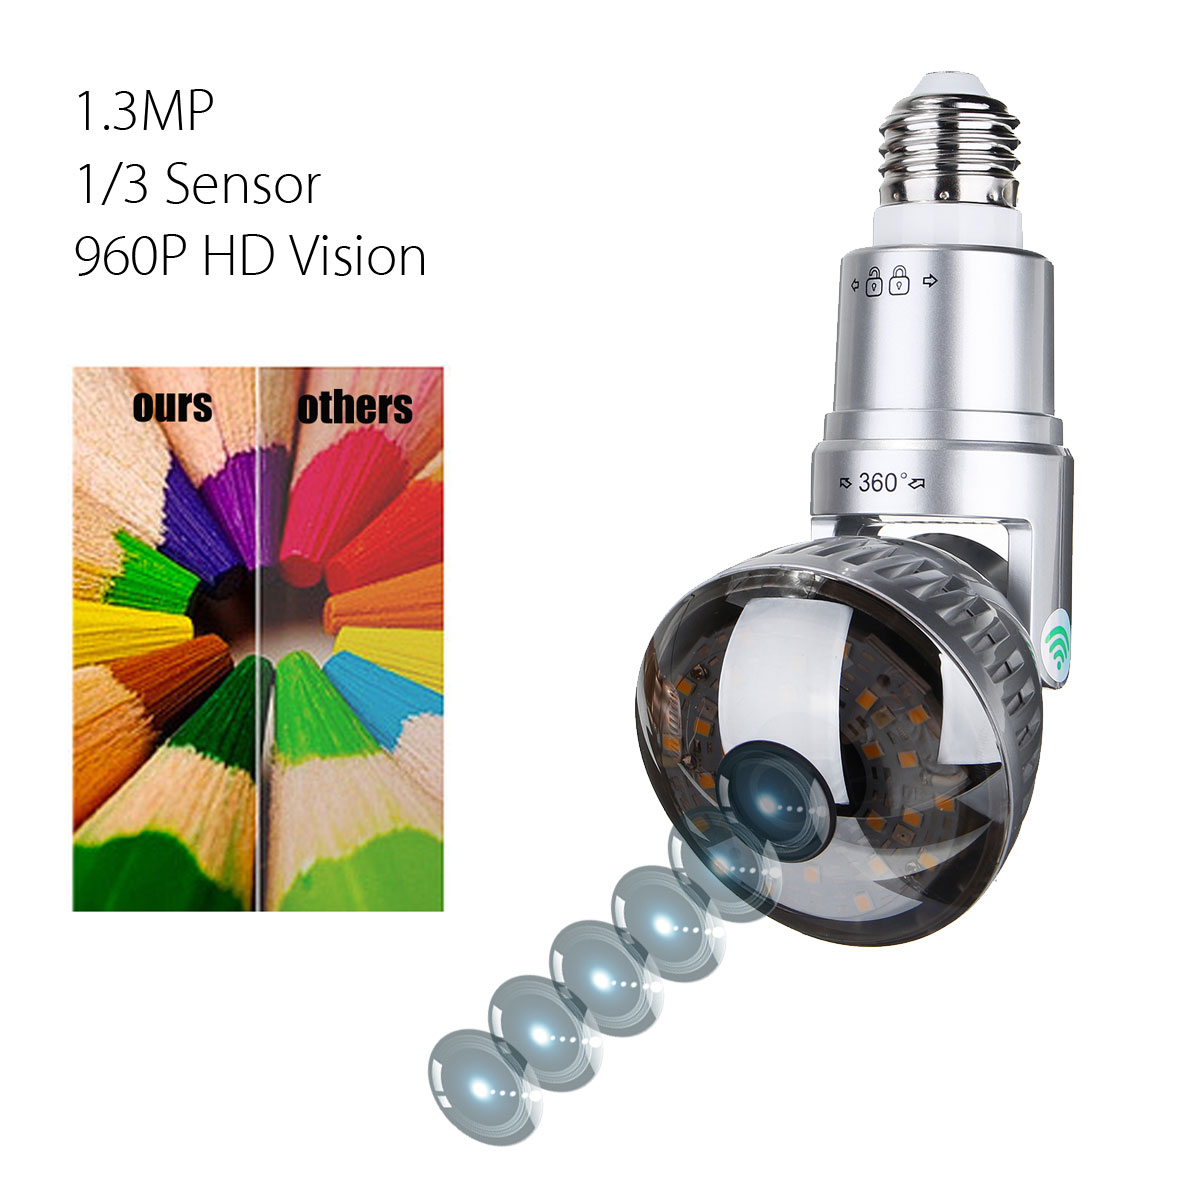 3.6mm Wireless Mirror Bulb Security Camera DVR WIFI LED Light IP Camera Motion Detection 54